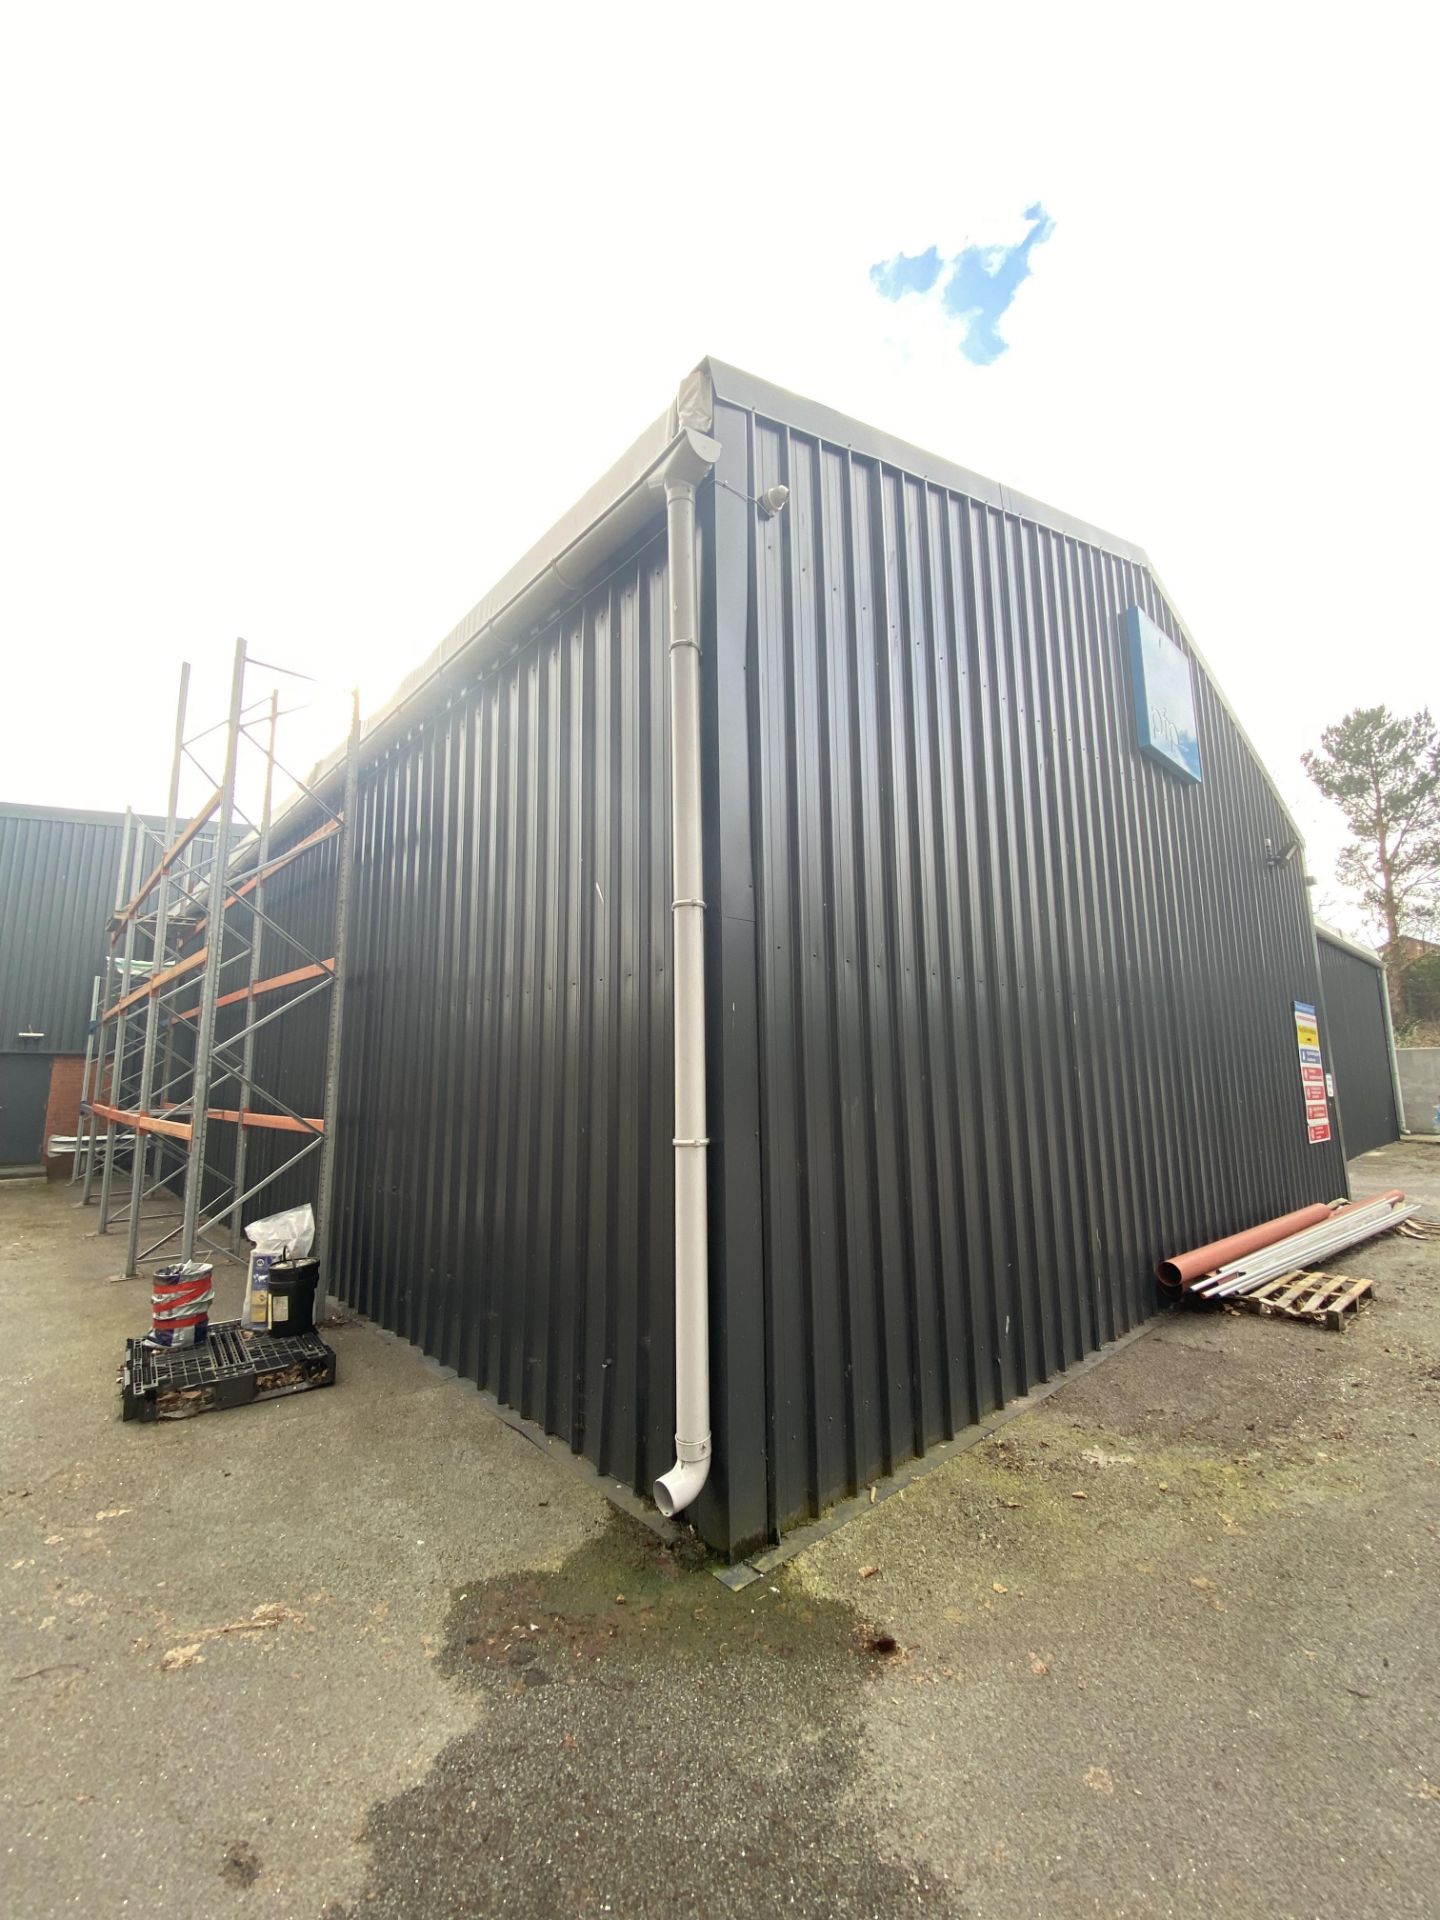 ALLOY PORTAL FRAMED TEMPORARY INDUSTRIAL BUILDING, approx. 16m x 10.7m x 4.8m high (eaves), 6.7m - Image 3 of 8